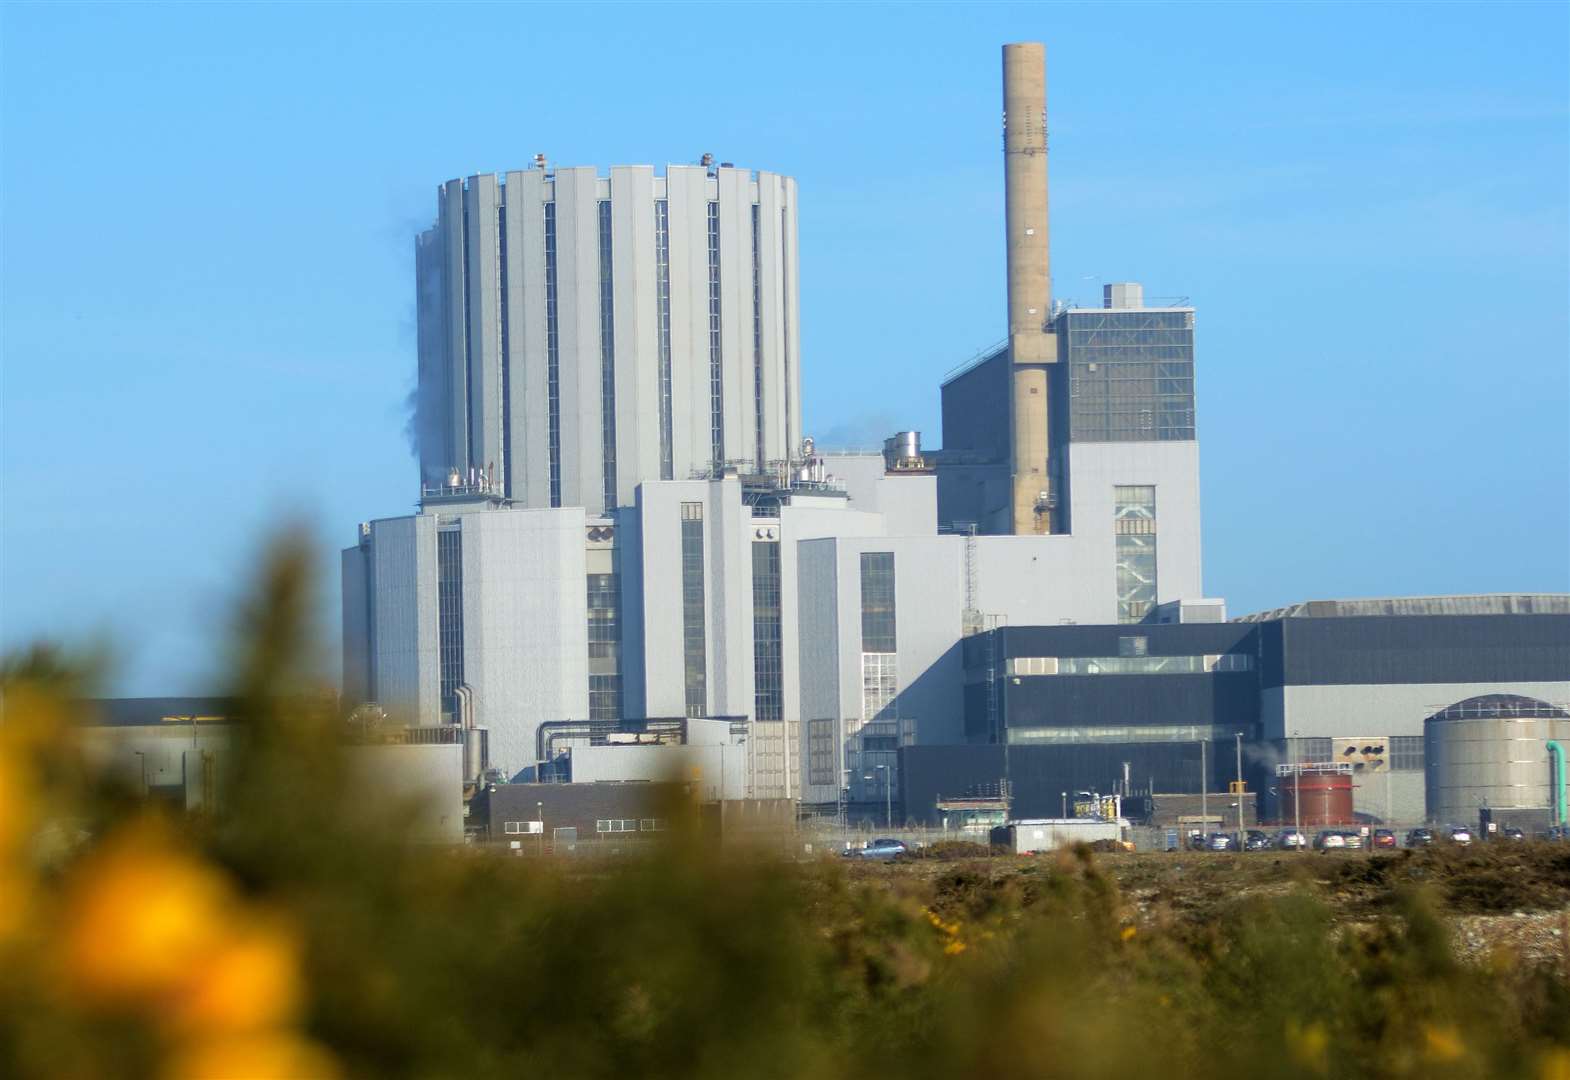 Dungeness B nuclear power station has been moved into the defuelling phase